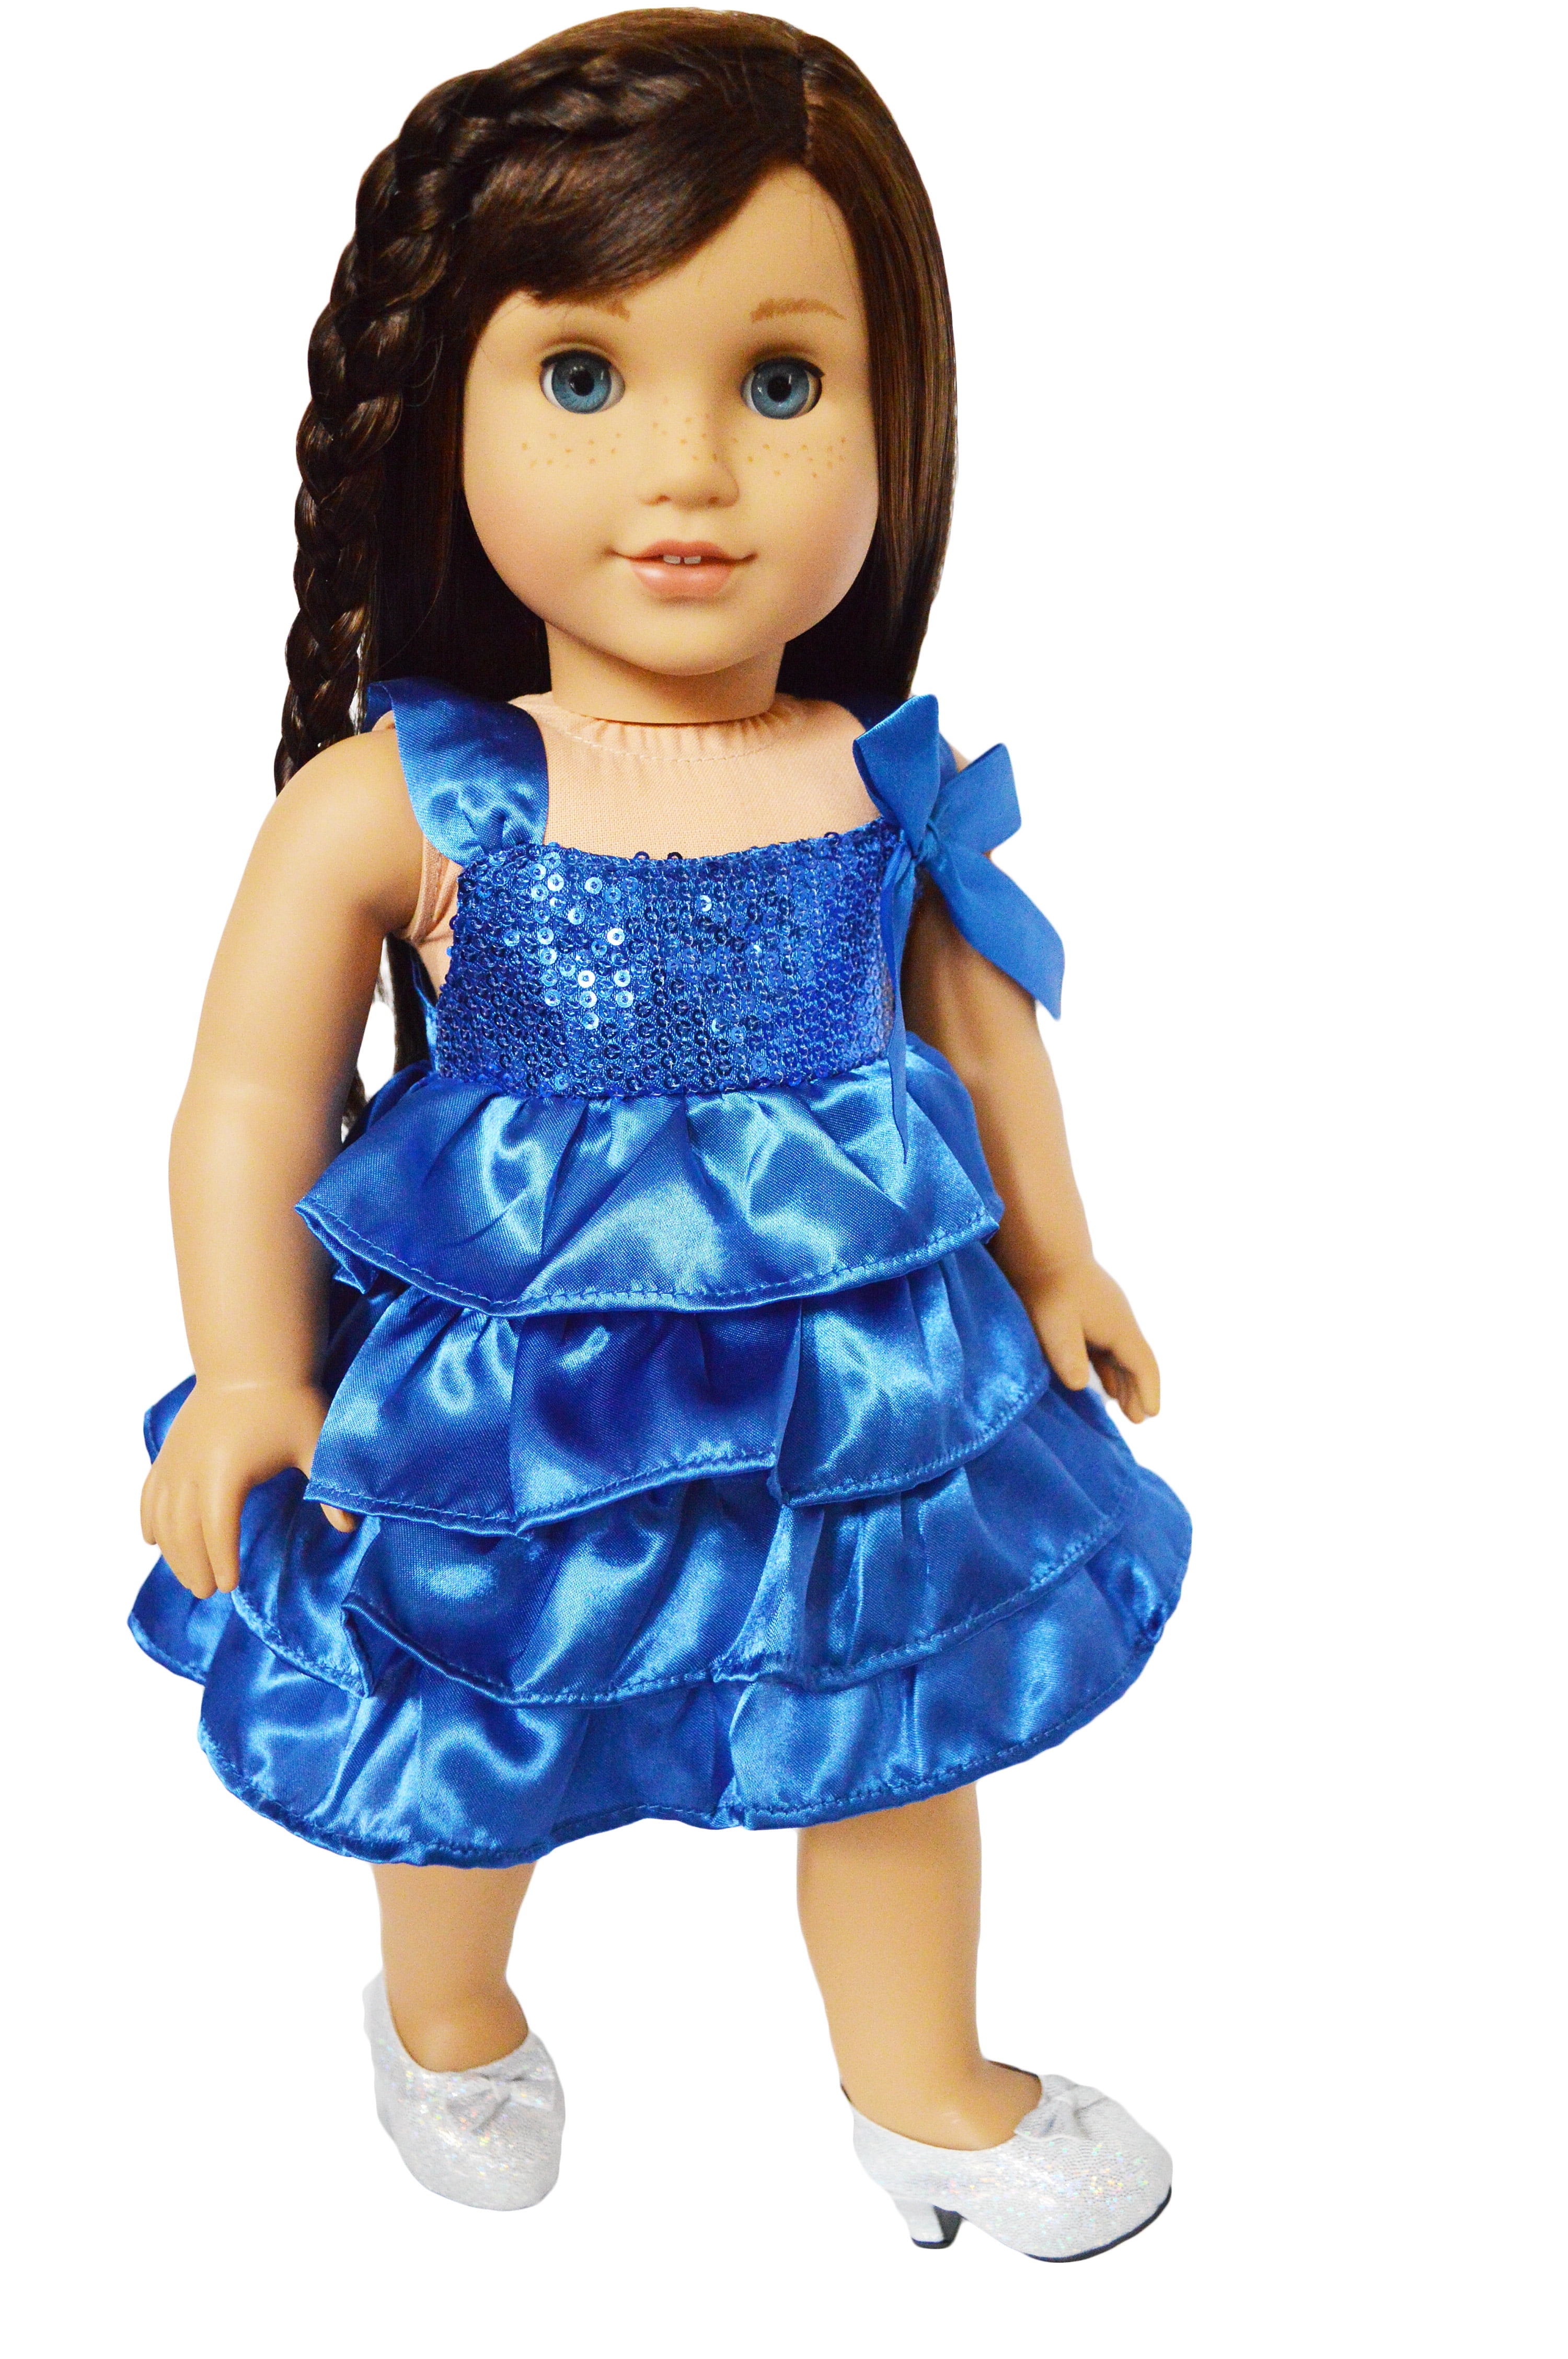 American Creations Blue Party Dress Compatible With 18 Inch Dolls Including American Girl And My